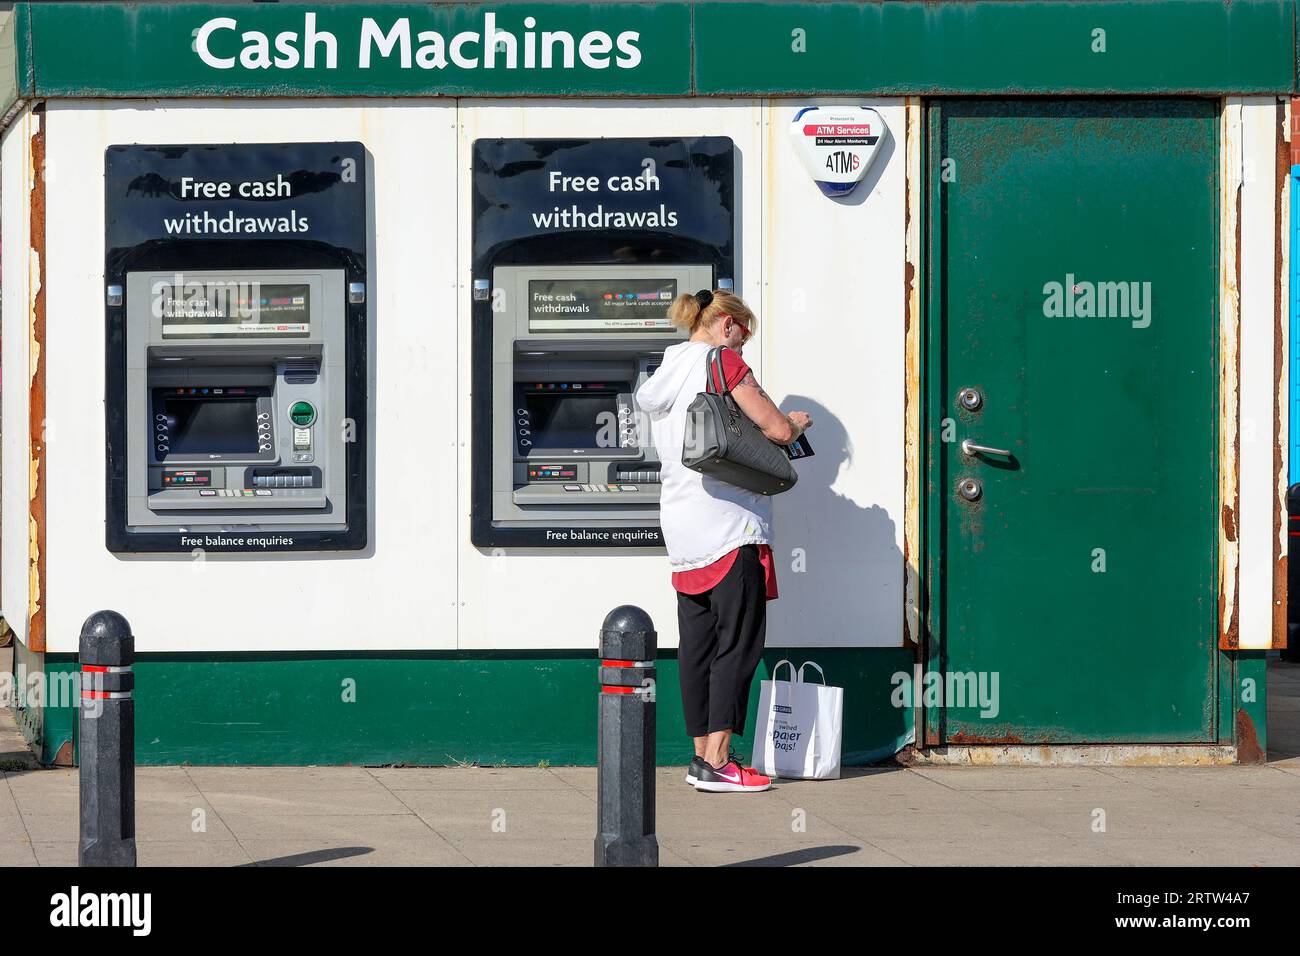 Woman using a cash point machine, for free cash withdrawals, Troon, Scotland, UK Stock Photo